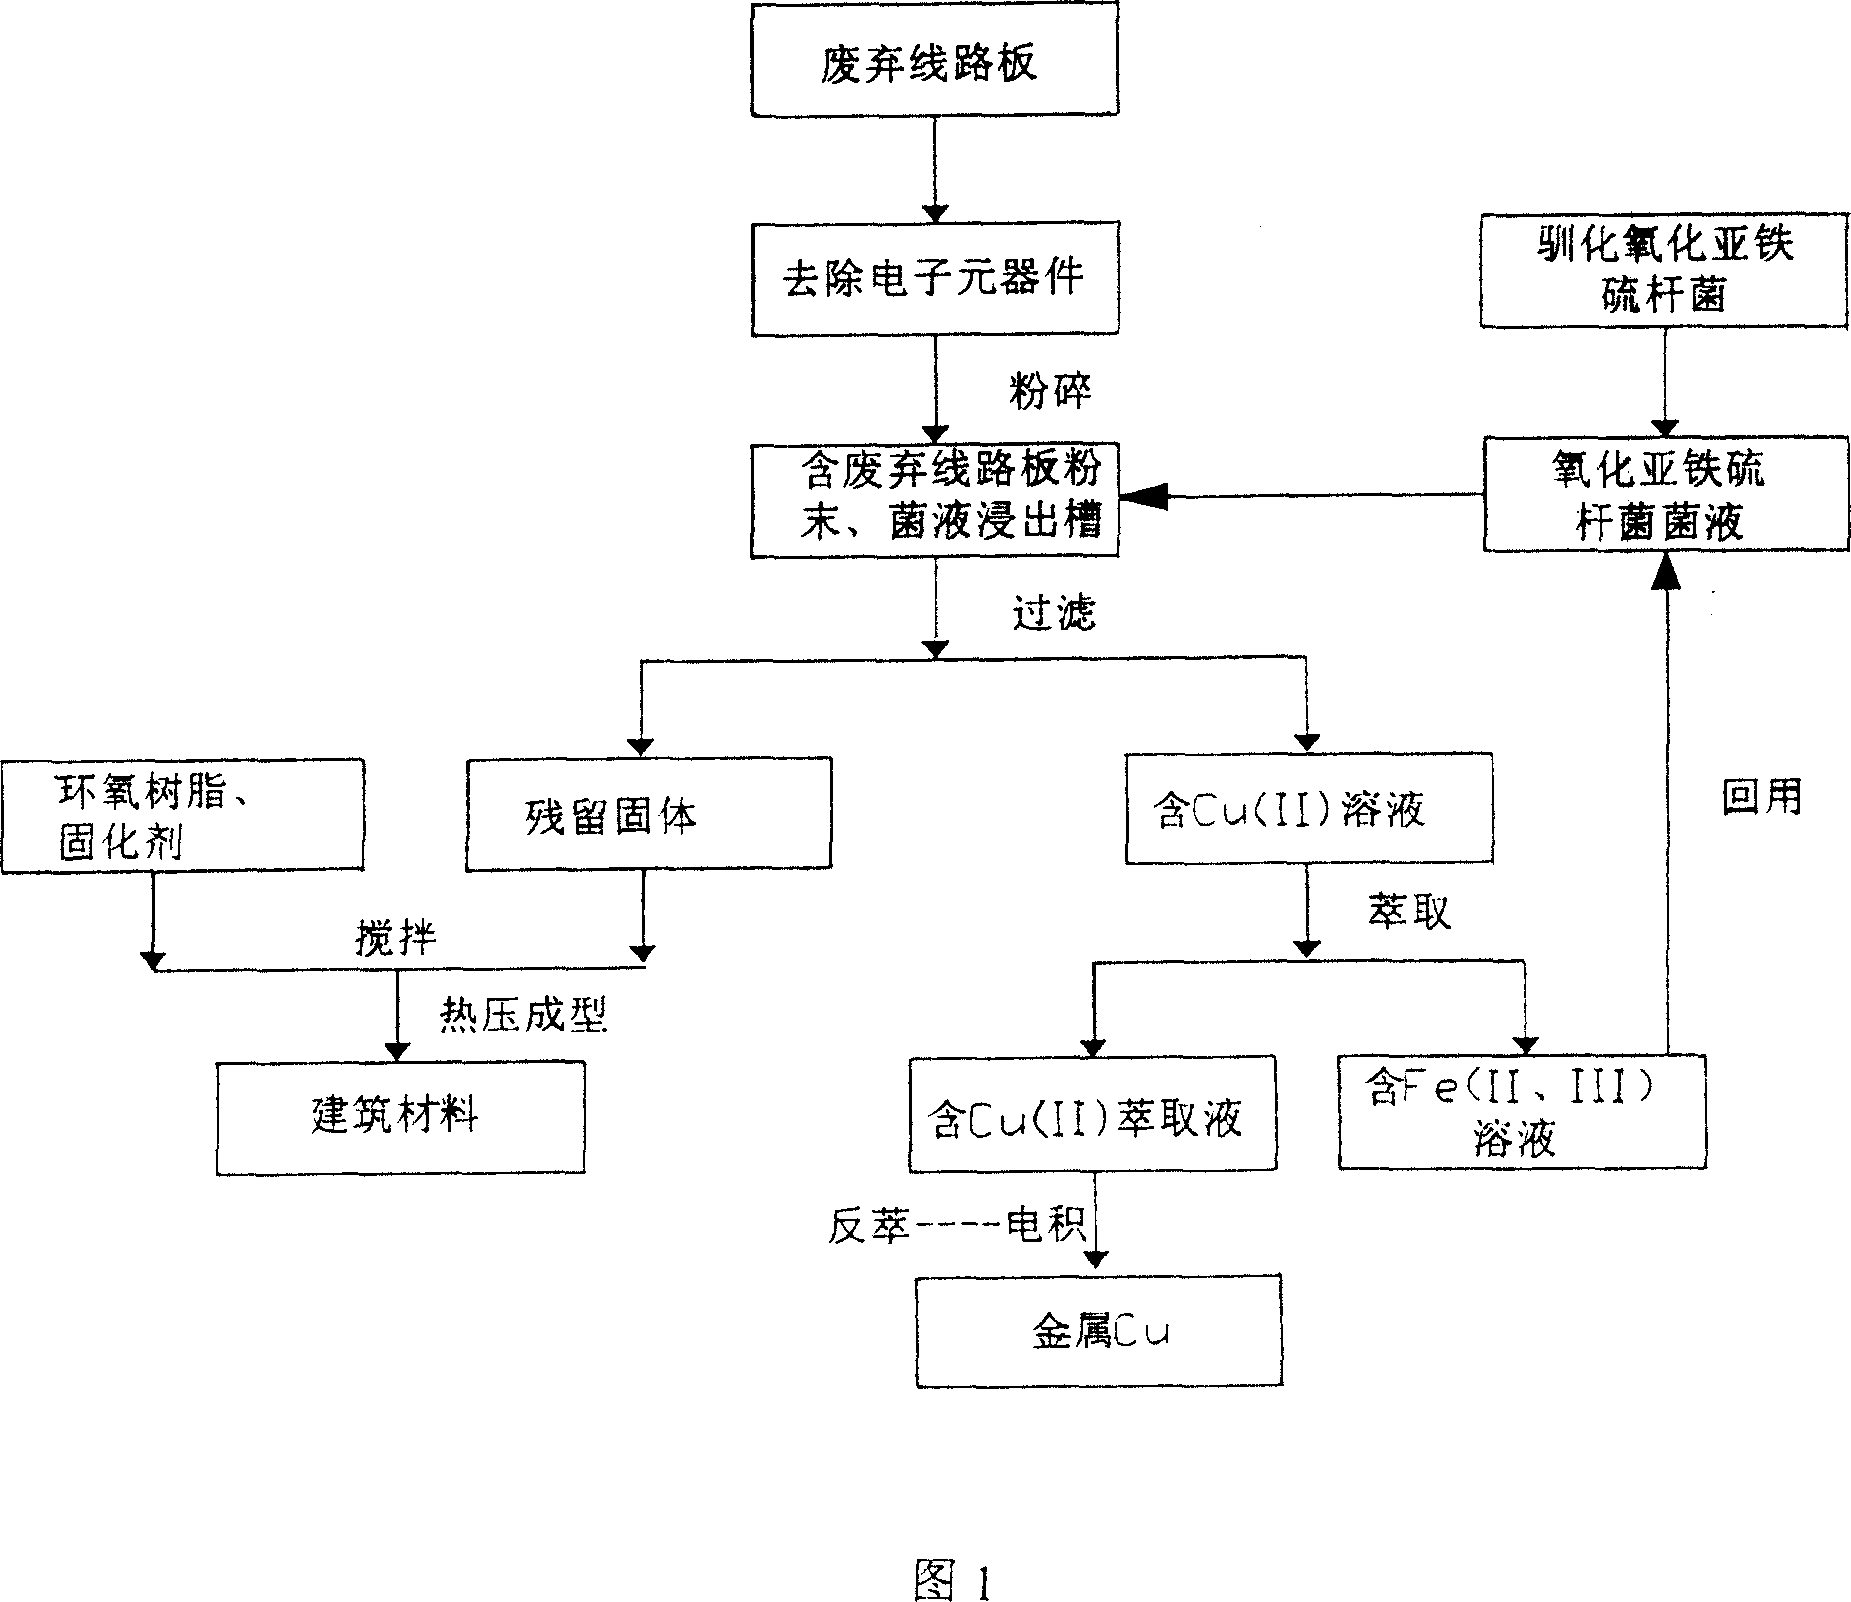 Comprehensive resources treatment method of waste circuit board